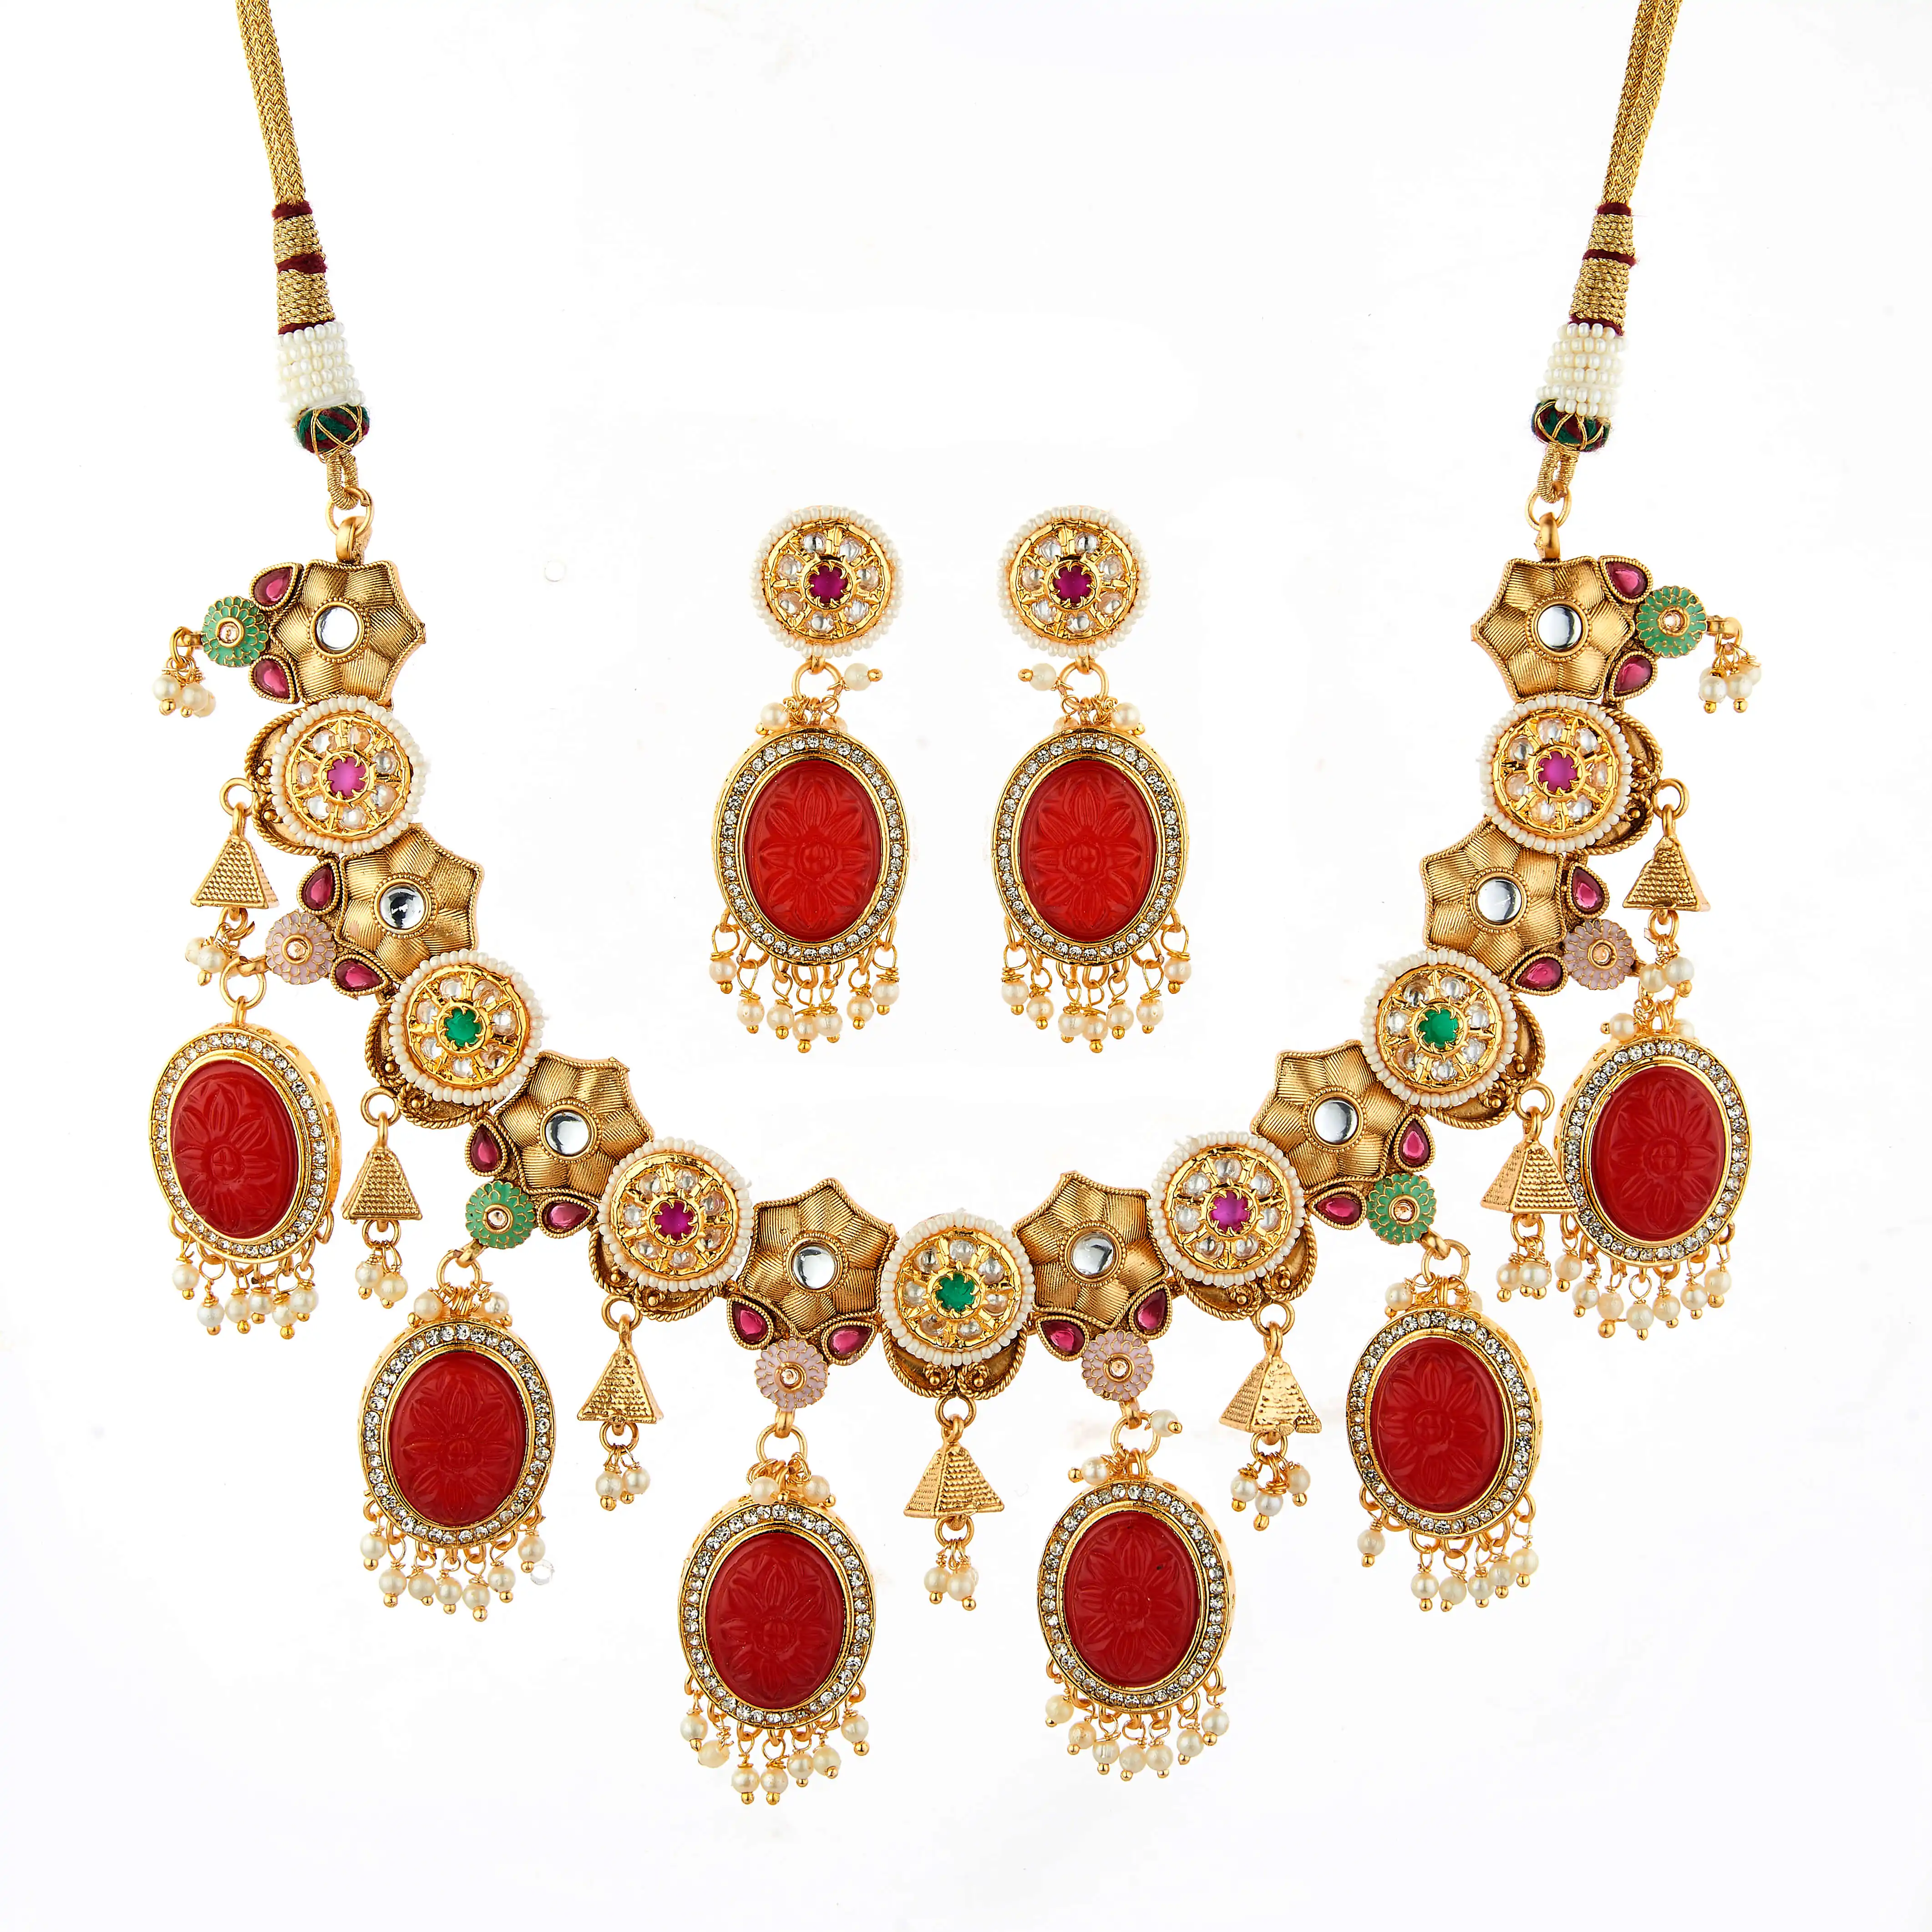 Buy Wholesale Handmade Elegant Antique Delicate Necklace set with gold plating for Womens 18106